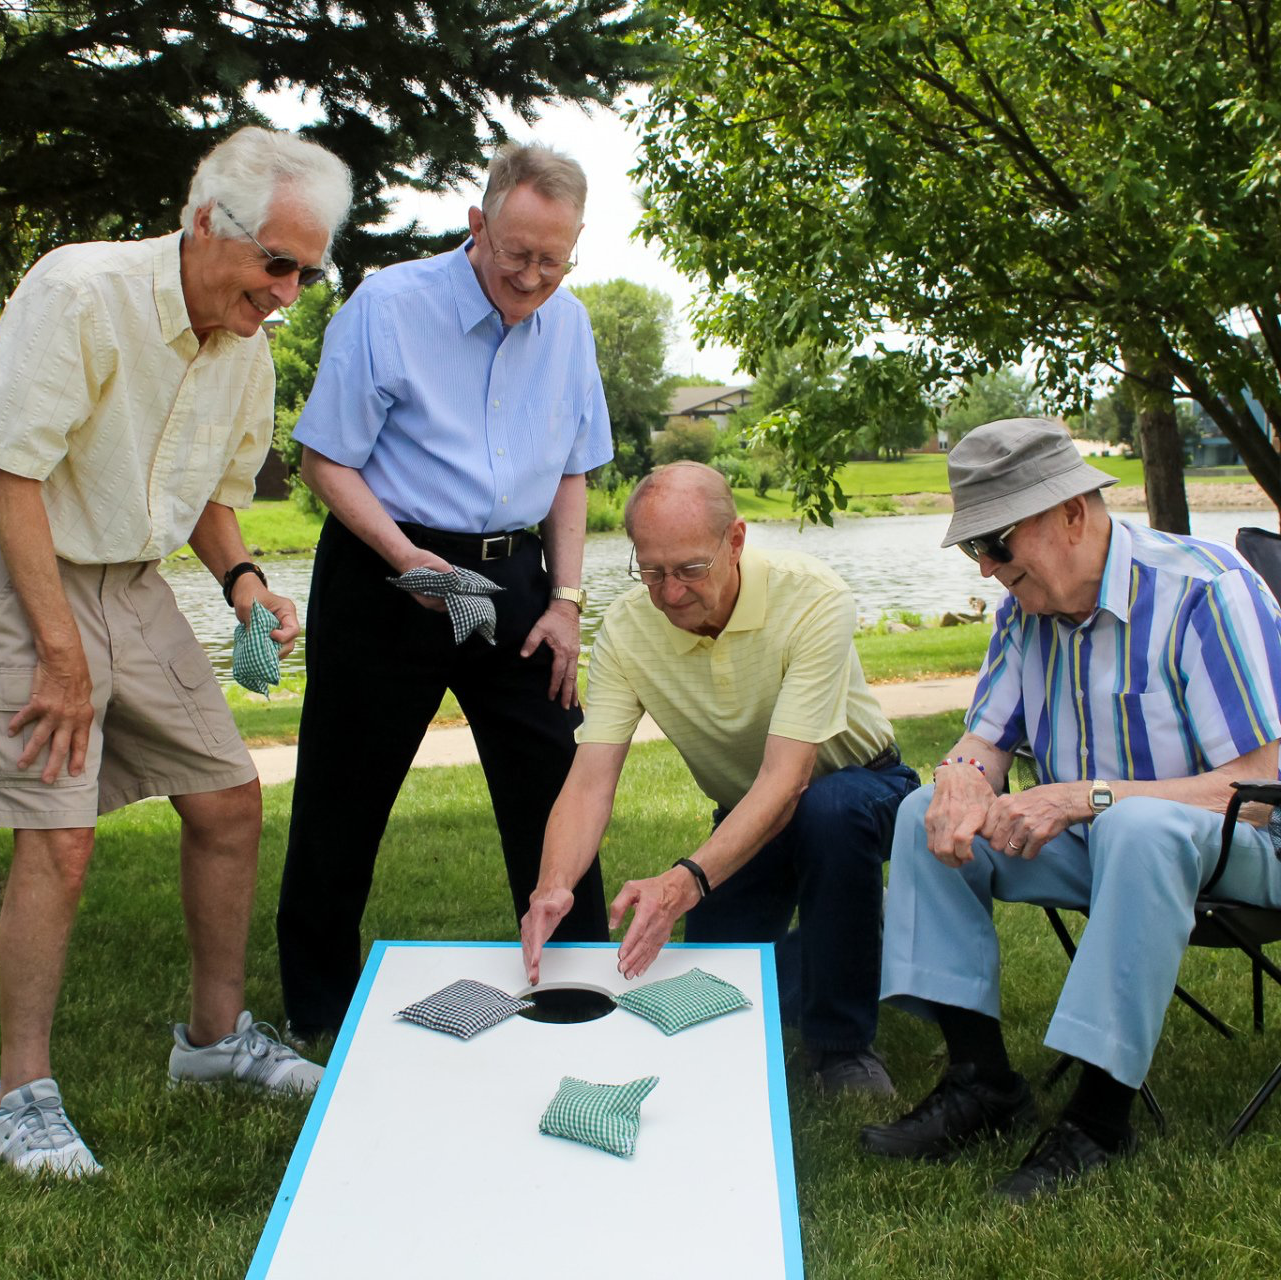 Group of retired men playing corn hole in the lawn of Friendship Village Retirement Community